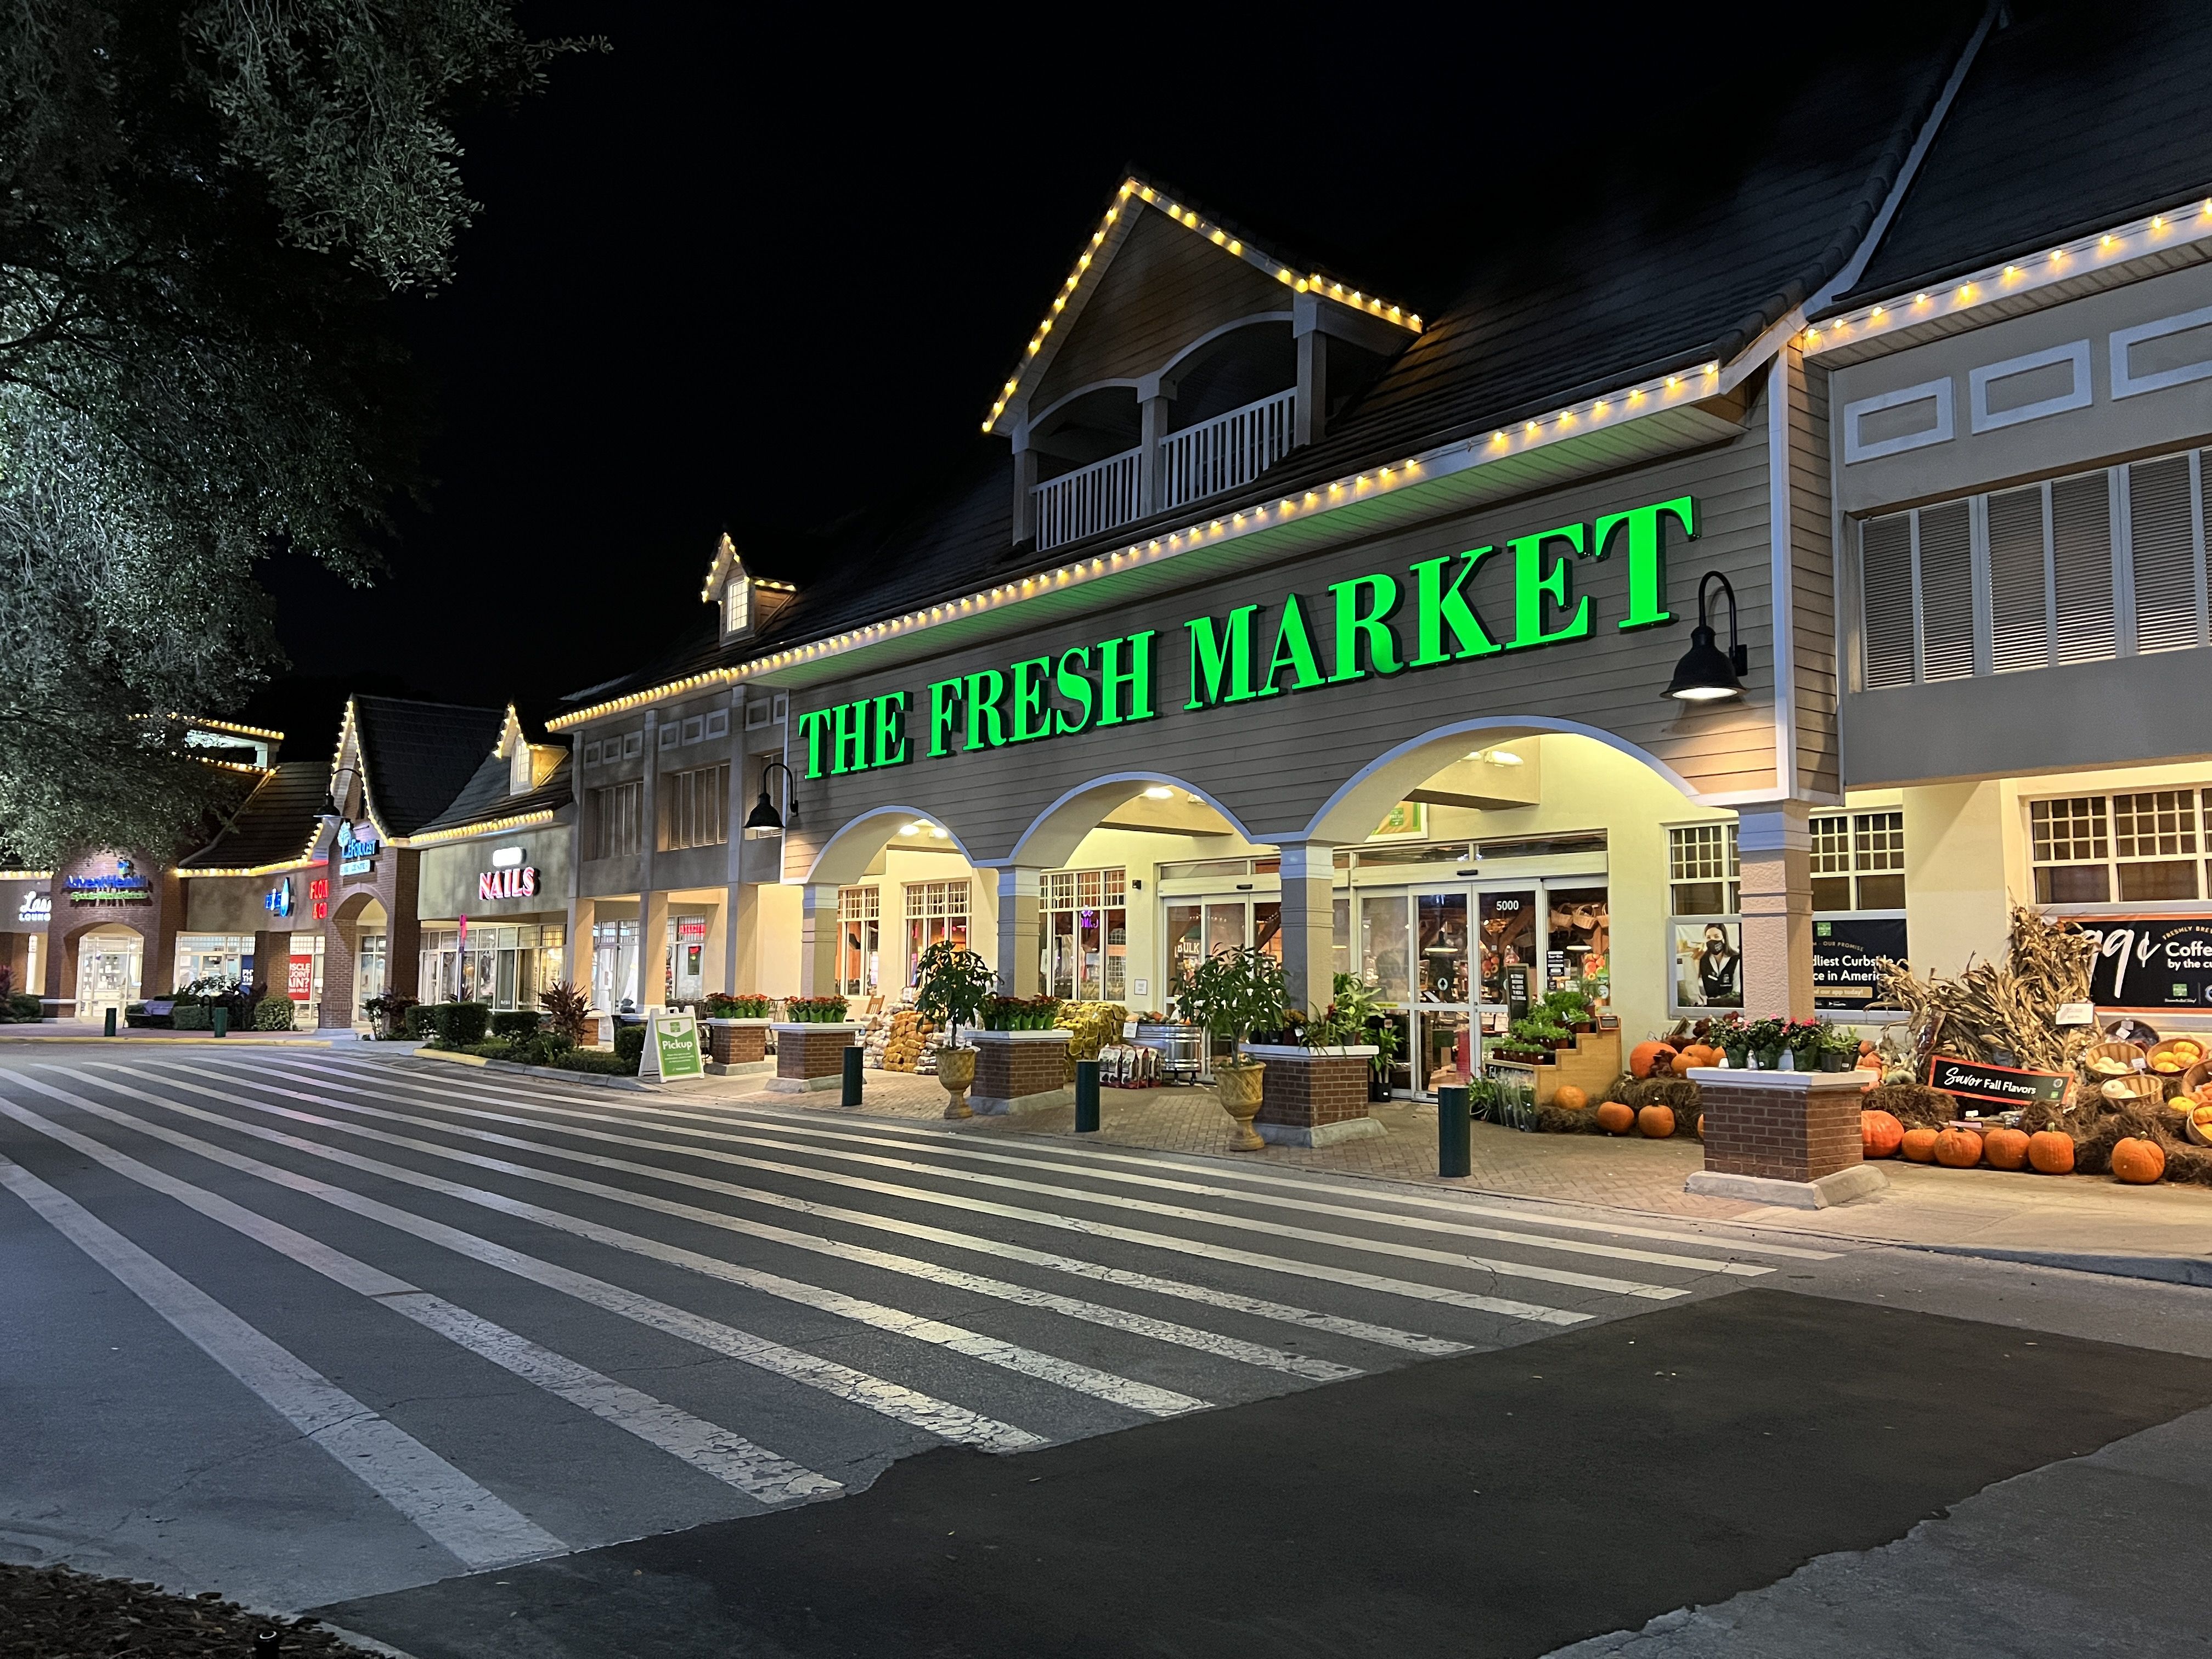 The Fresh Market - Eat fresh and save when you shop our Fresh